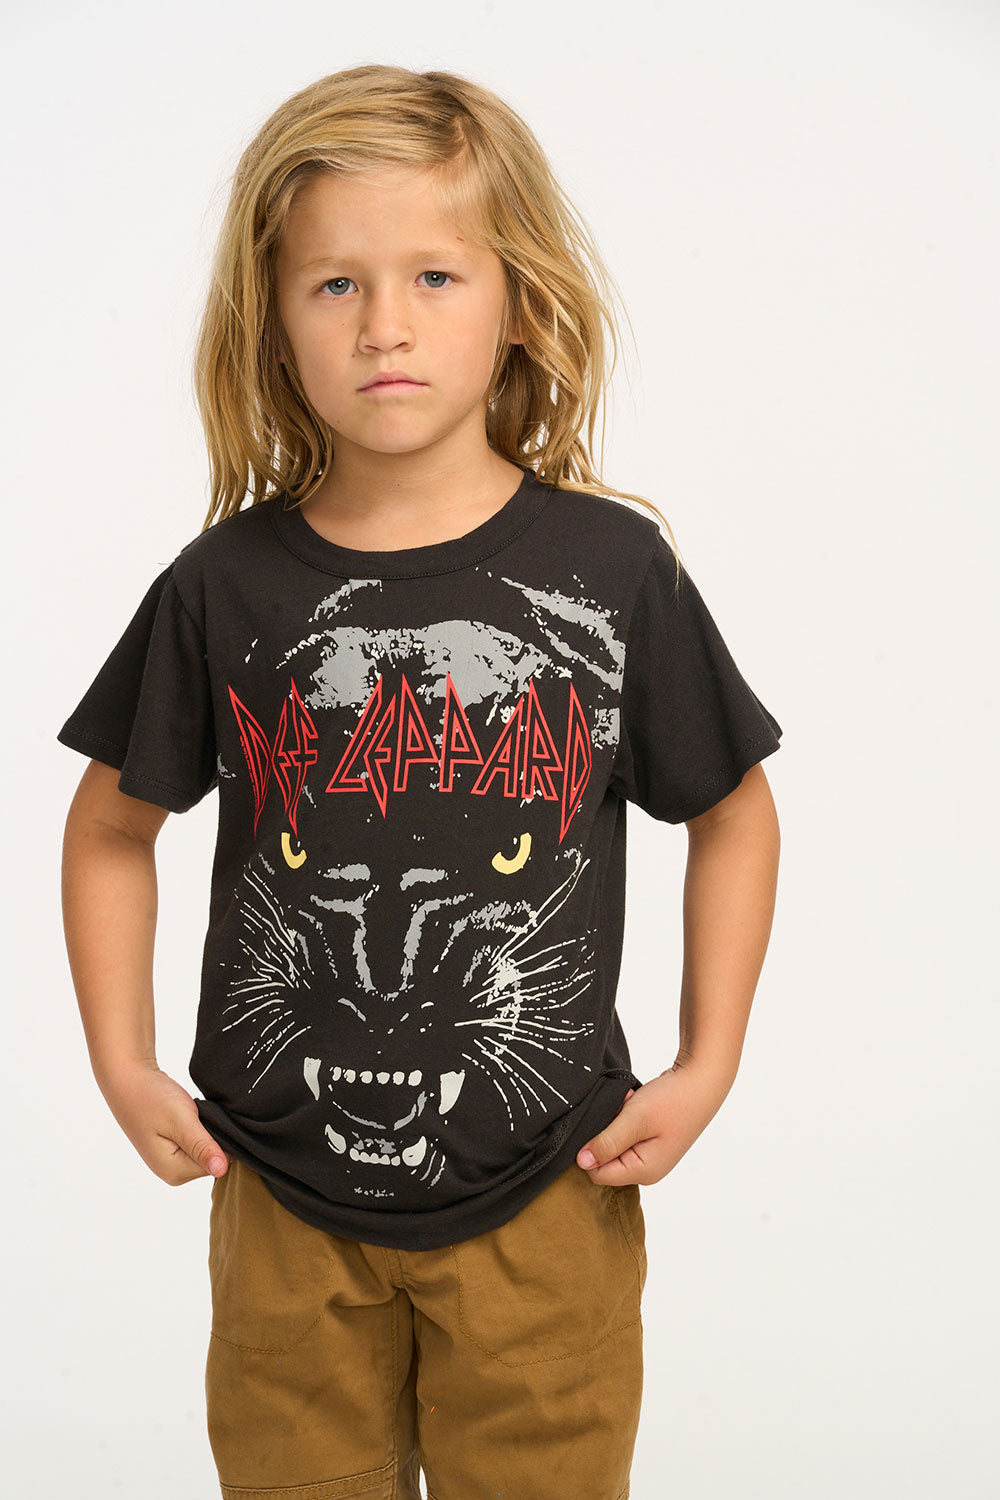 Def Leppard Leopard Tee BOYS chaserbrand